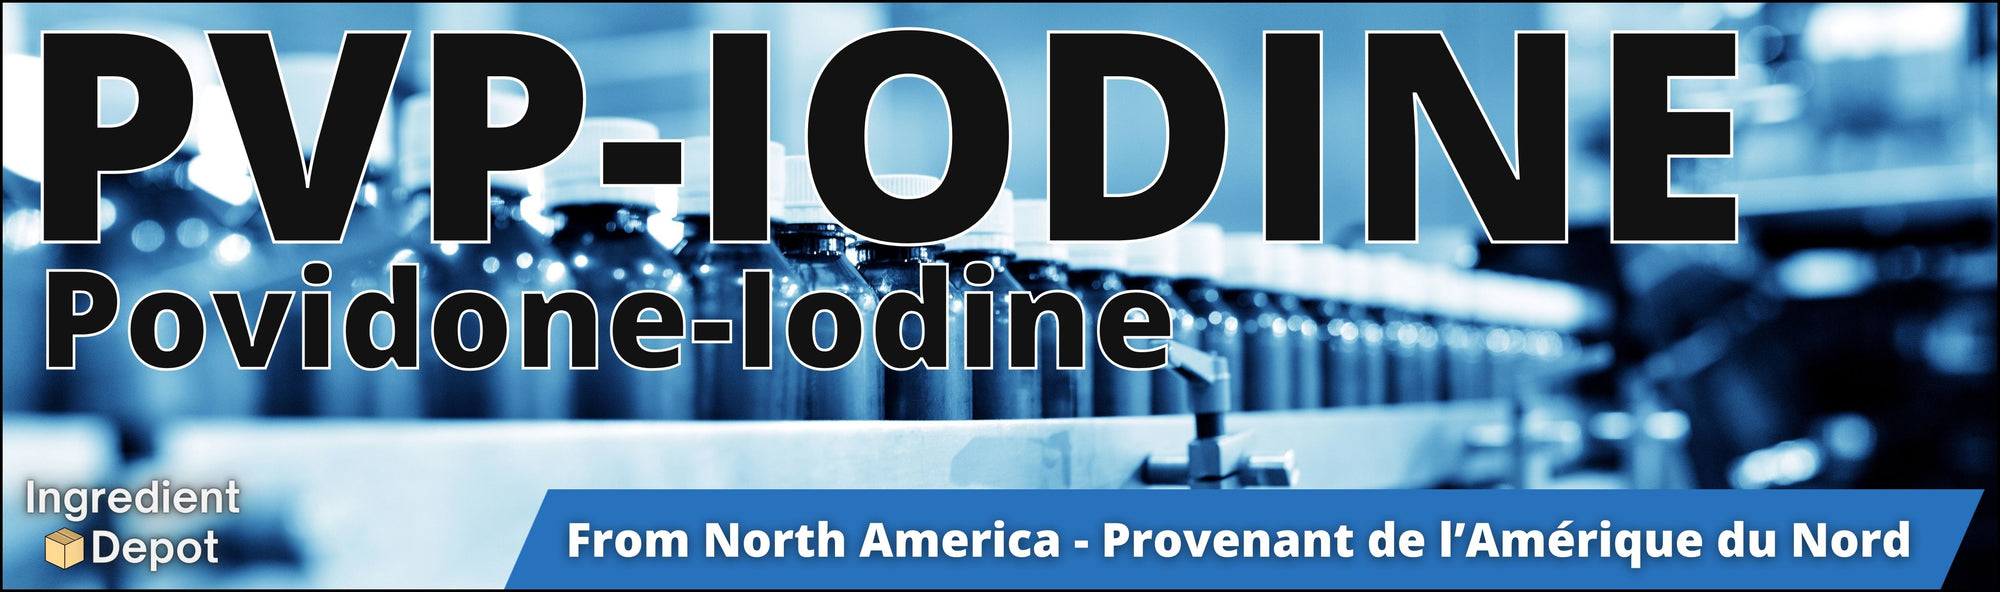 Ingredient Depot PVP-Iodine 30/06 from North America